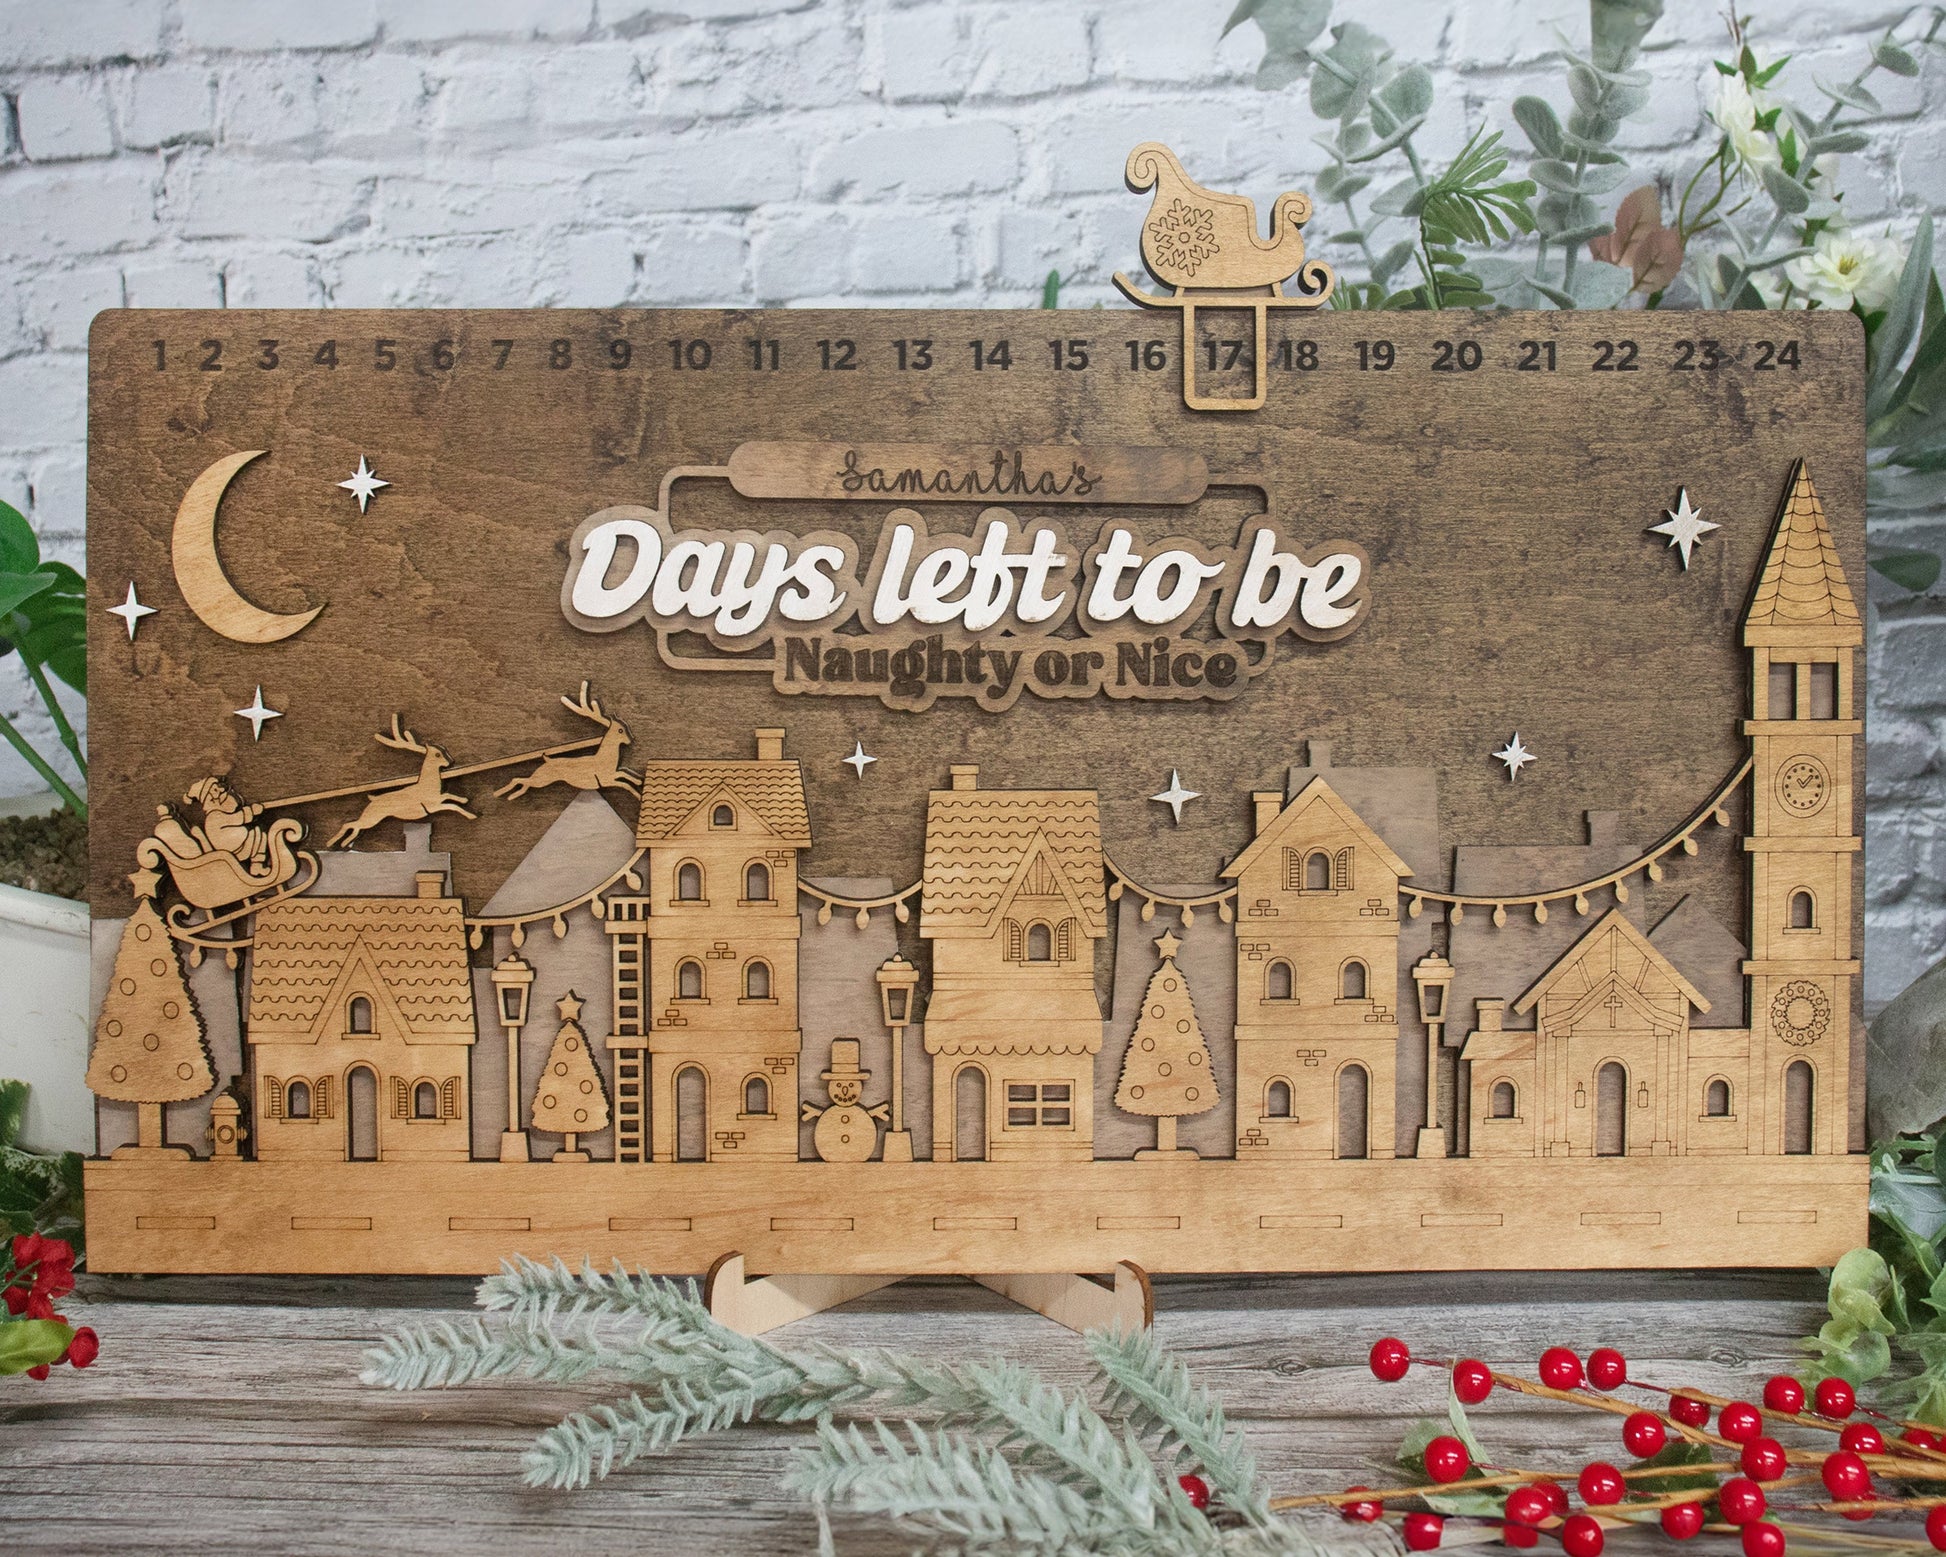 Christmas Countdowns - 4 Main Themes - 10 text options - Laser Designs - Tested on Glowforge & Lightburn